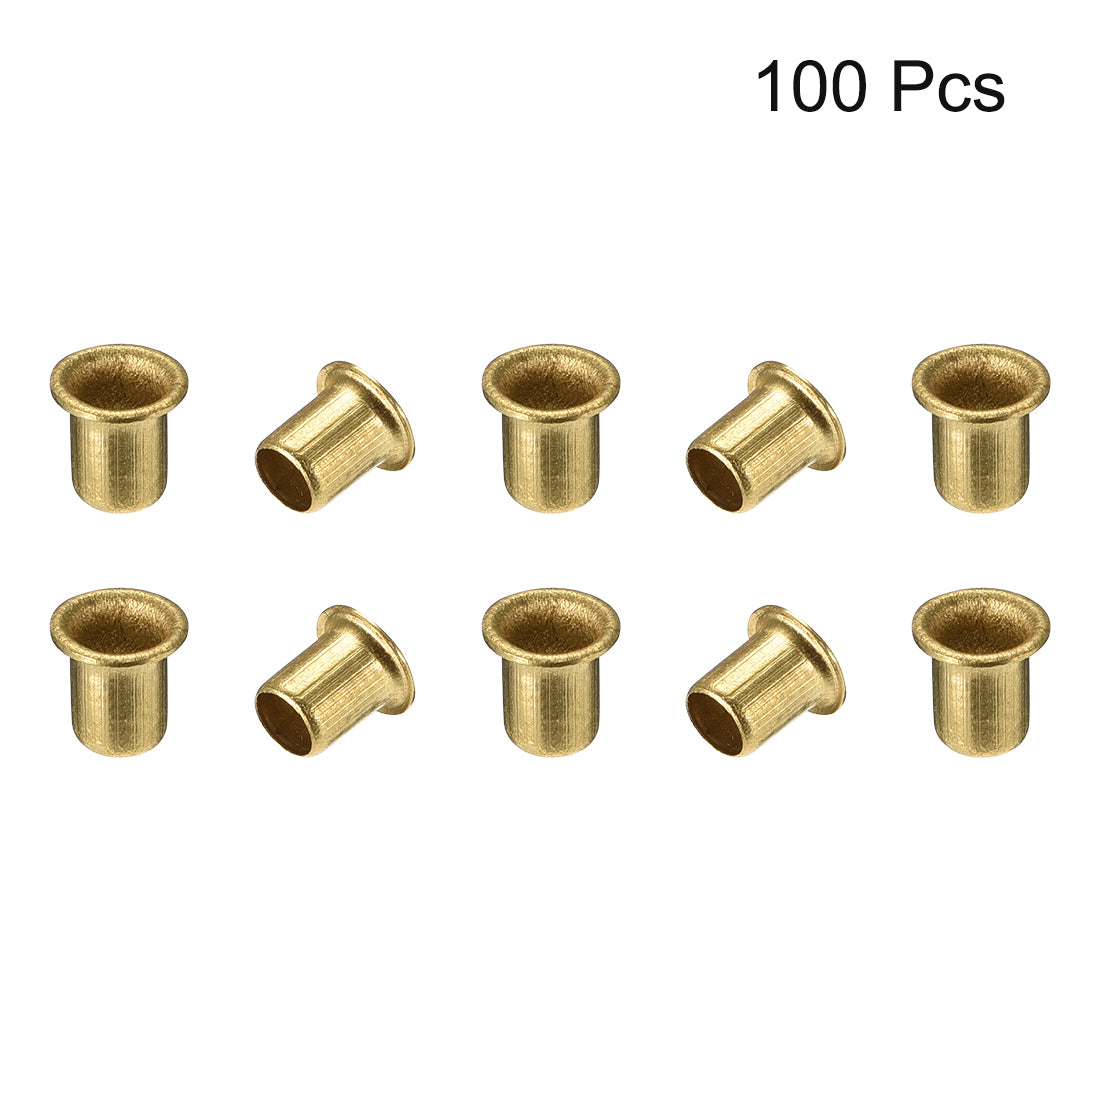 uxcell Uxcell Hollow Rivet,5mm x 6mm Through Hole Copper Hollow Rivets Grommets Double-sided Circuit Board PCB 100Pcs